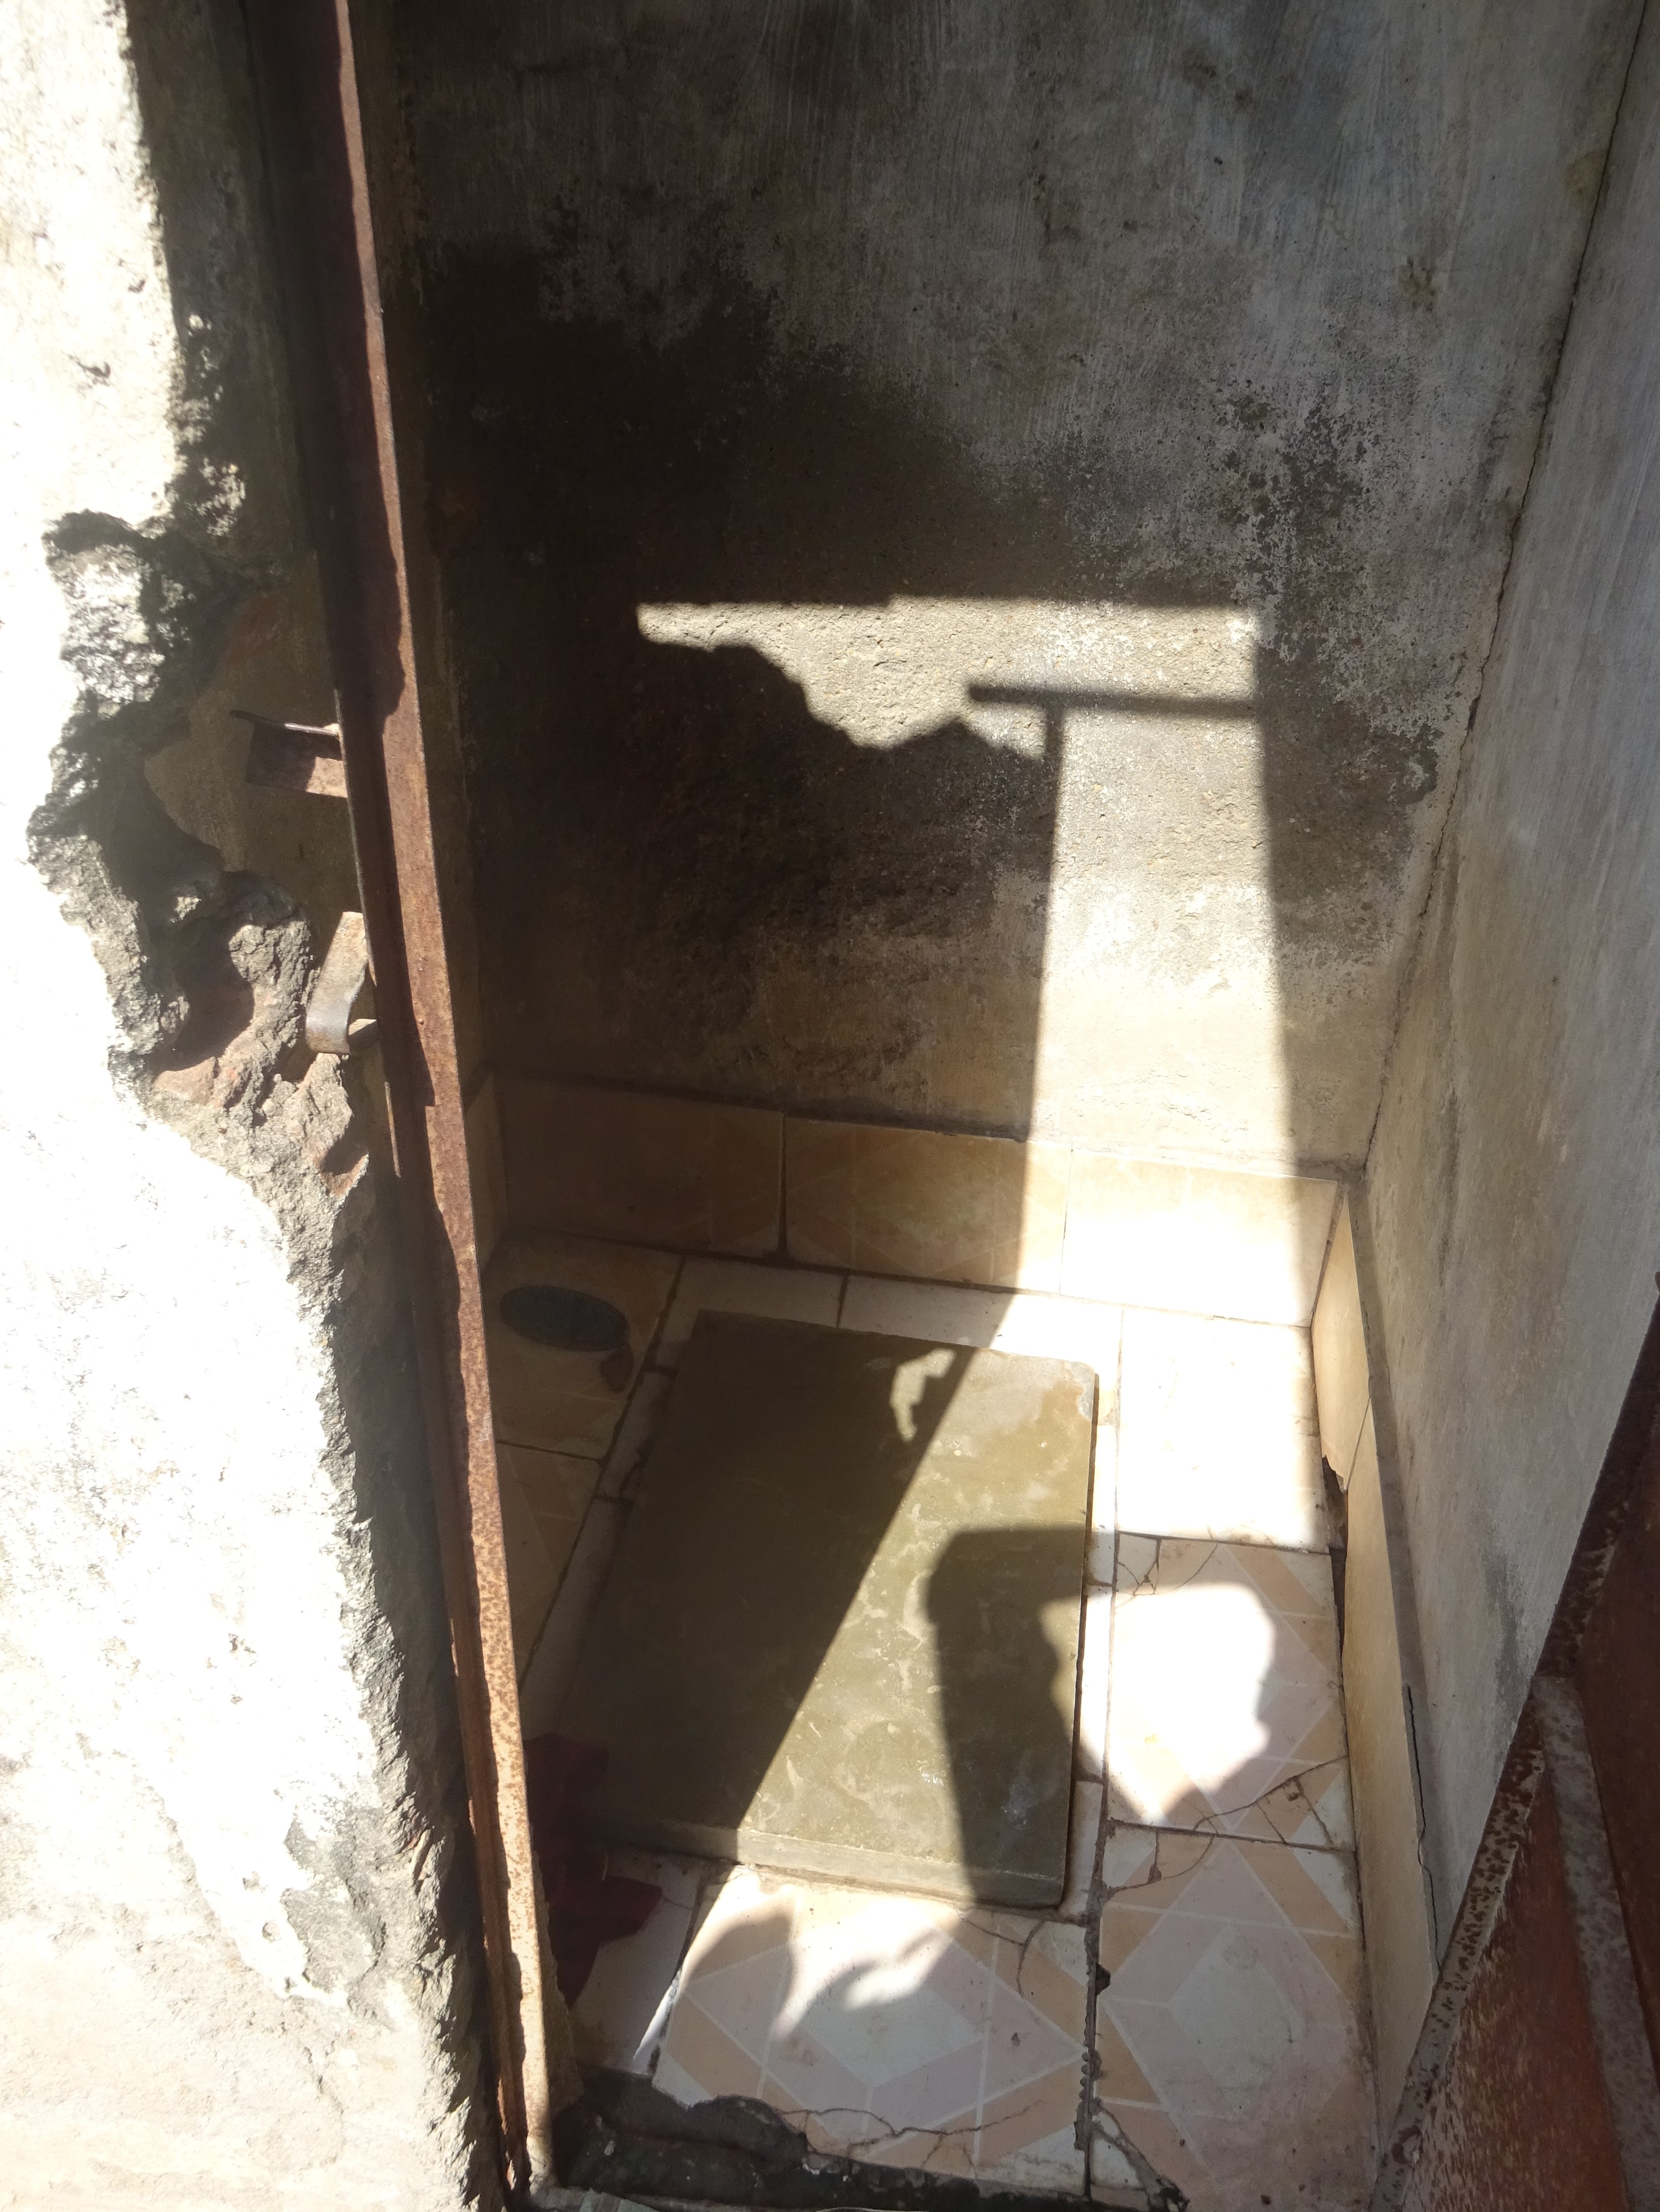 The condition of a toilet in a village. (Source: Dalberg)